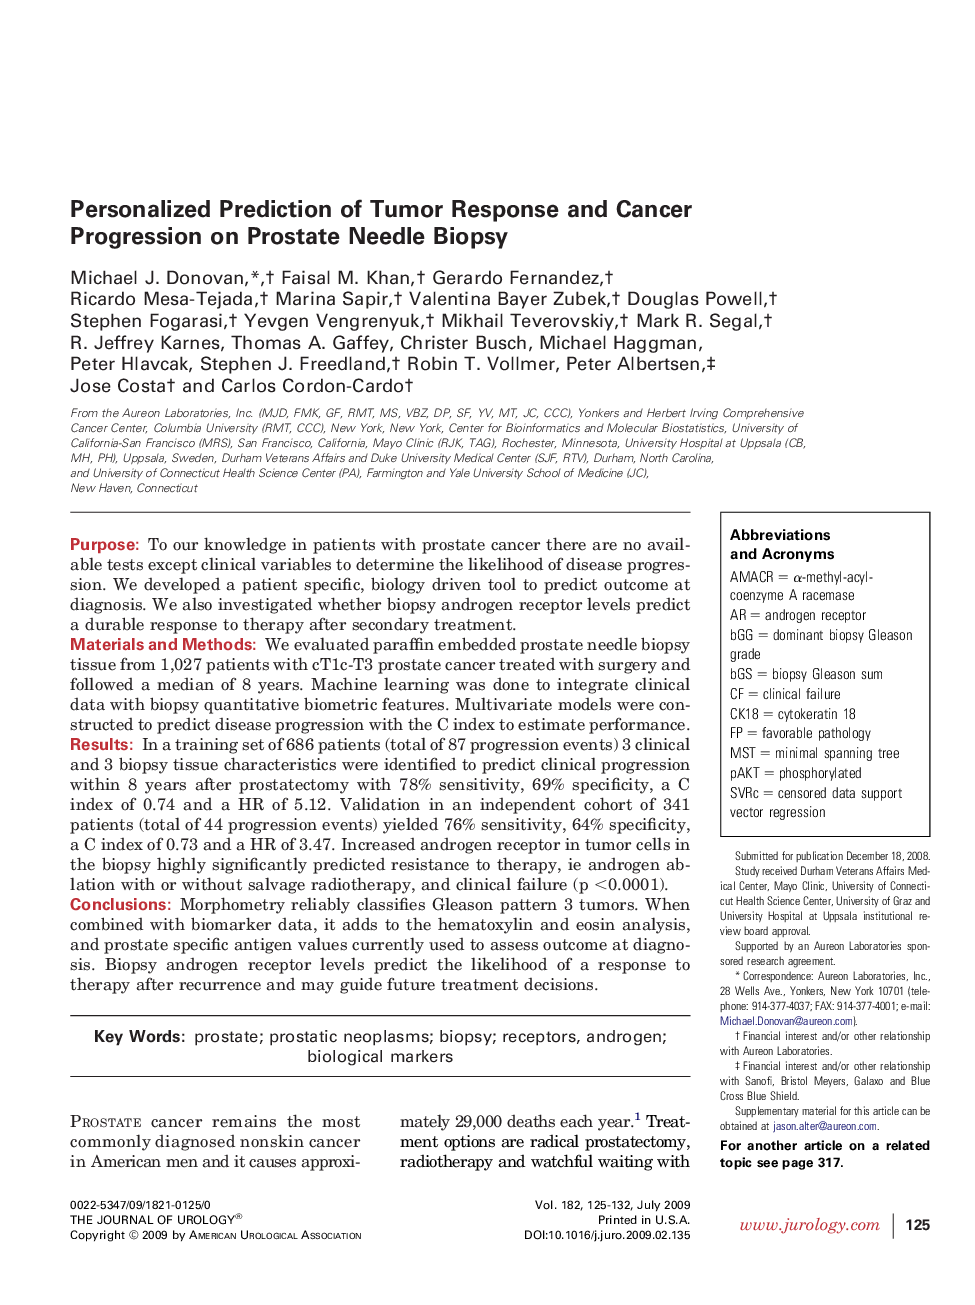 Personalized Prediction of Tumor Response and Cancer Progression on Prostate Needle Biopsy